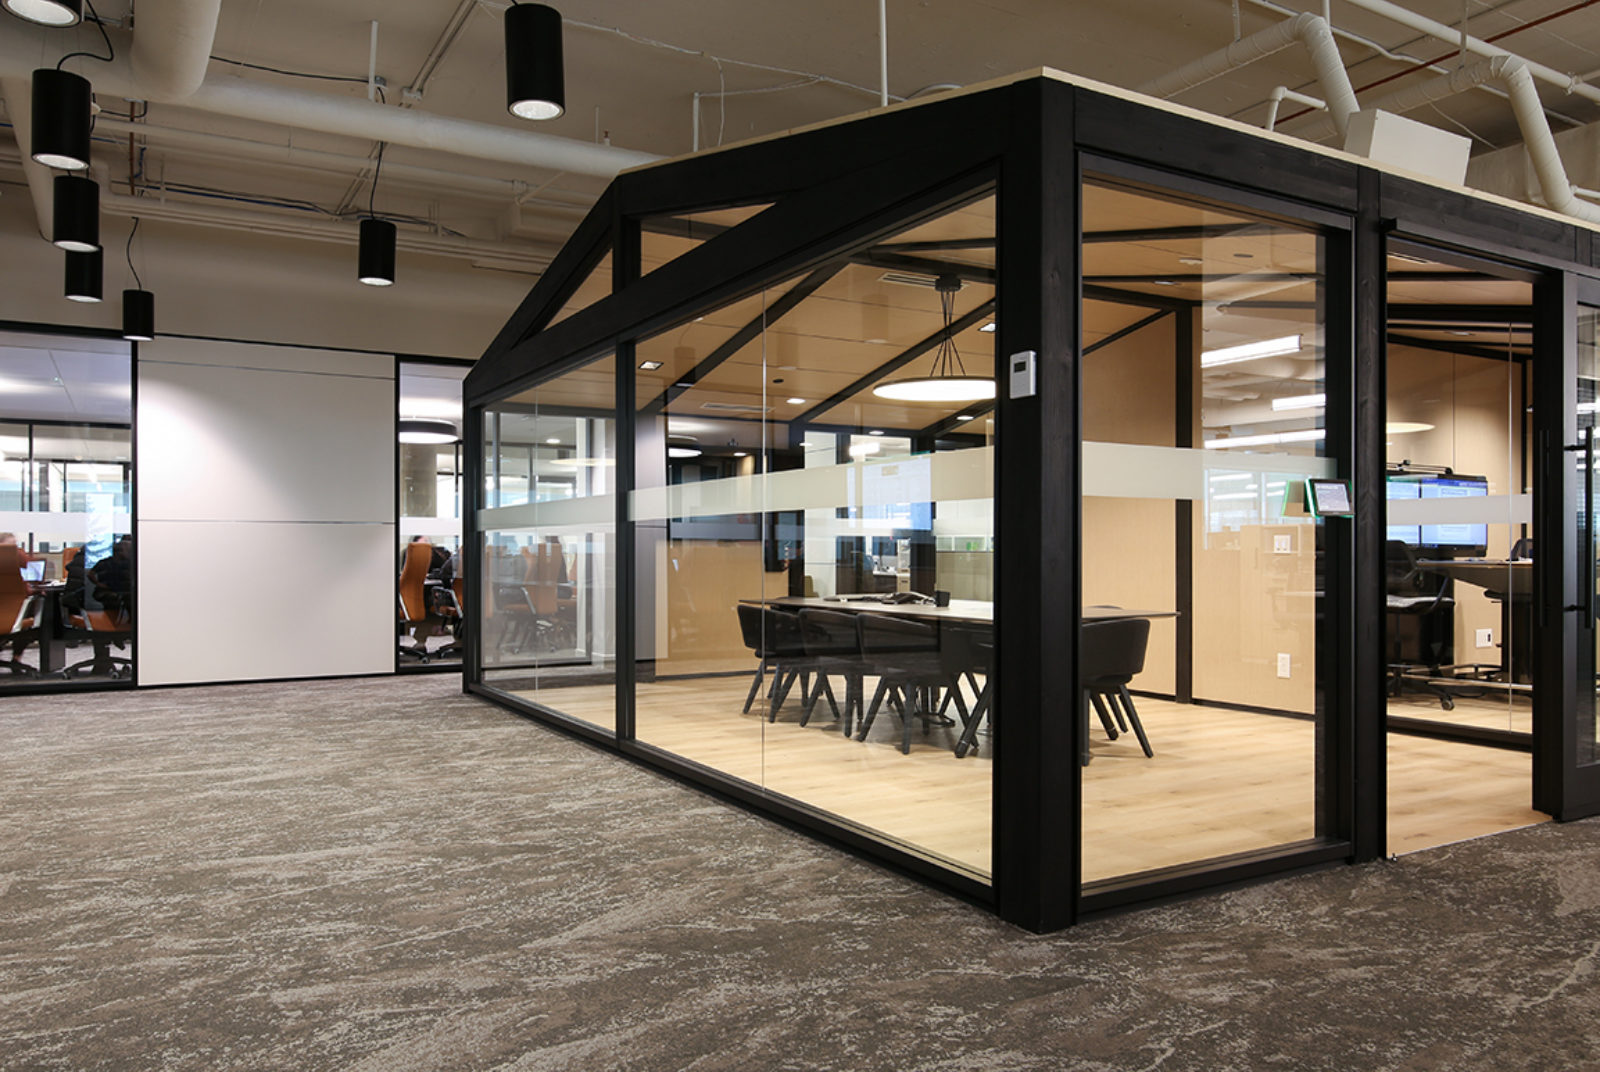 Room with exposed ceilings, carpet and freestanding DIRTT solution.  Conference area has glass walls, thick black beams, light wood interior